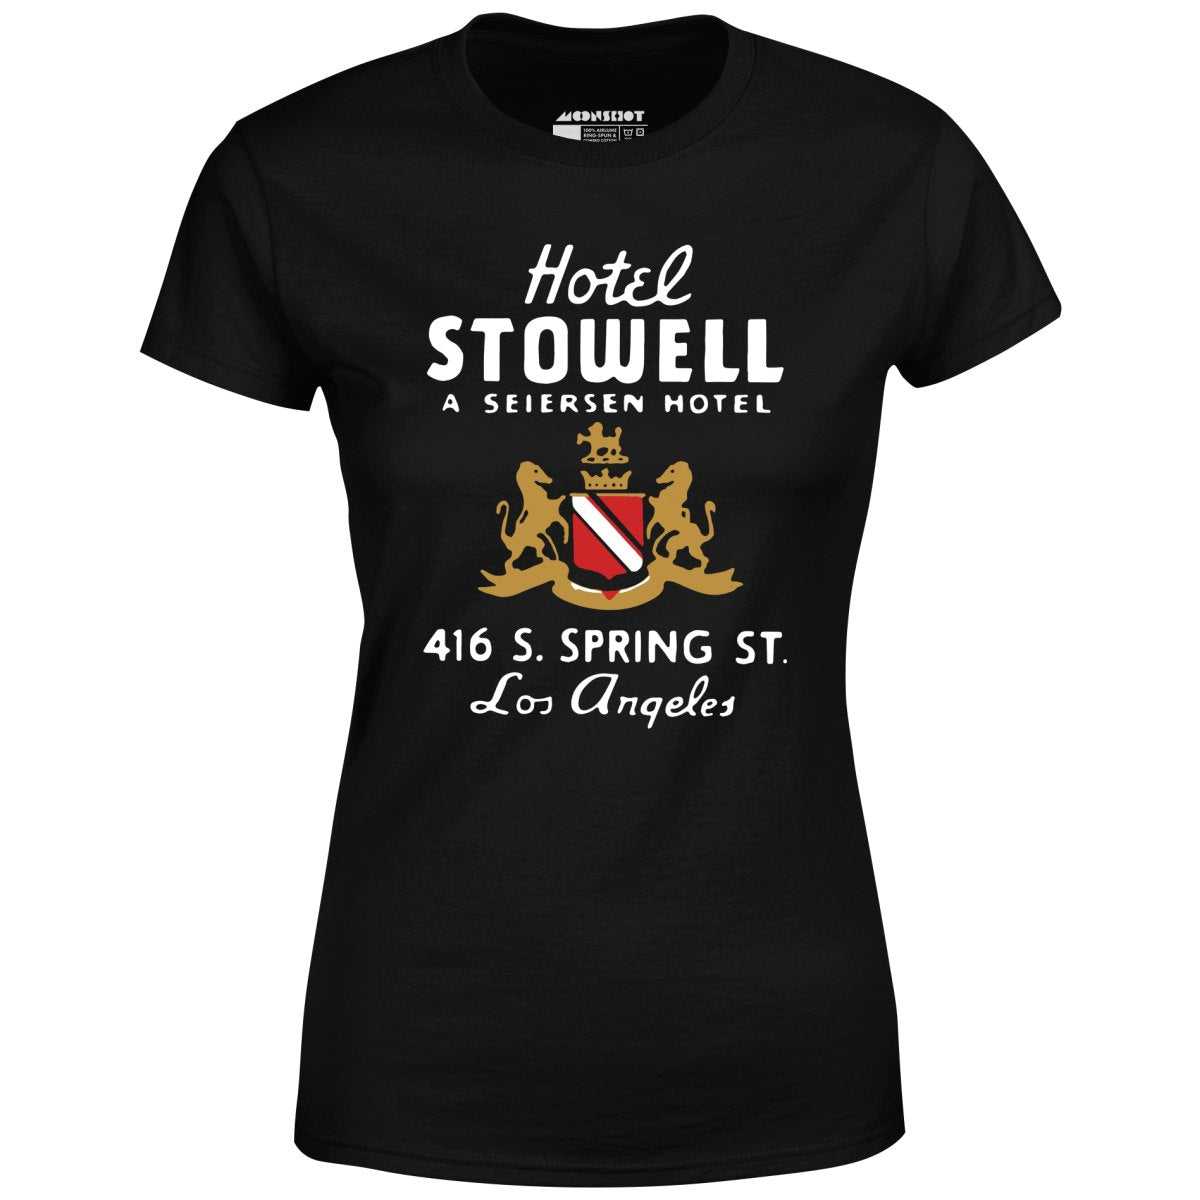 Hotel Stowell - Los Angeles, CA - Vintage Hotel - Women's T-Shirt